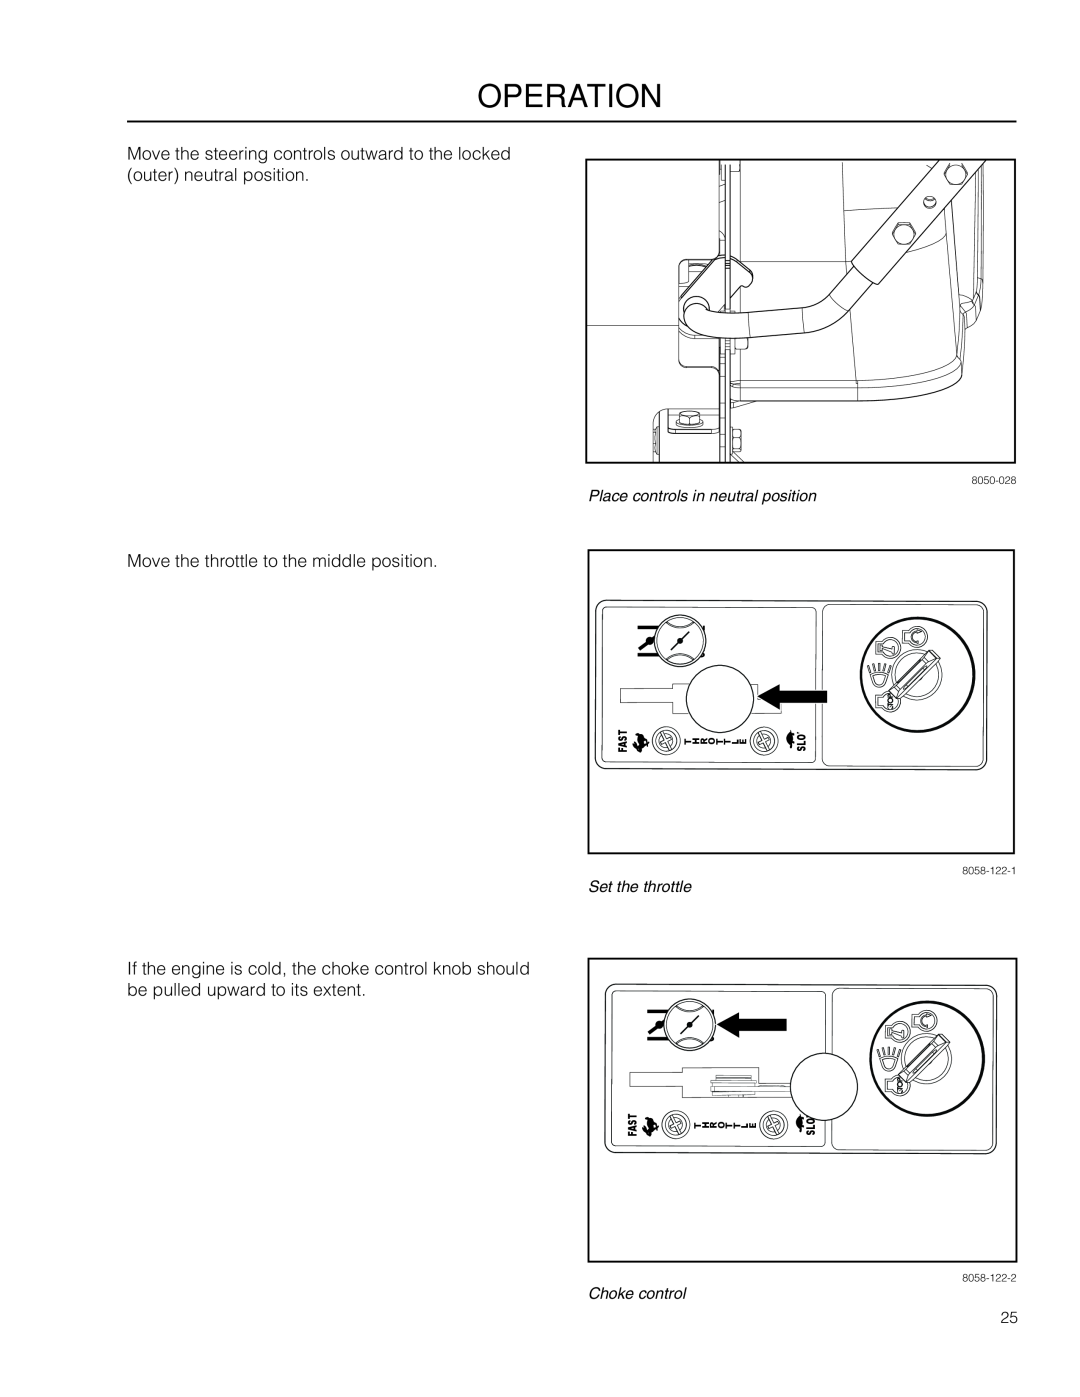 Husqvarna RZ4219BF / 966582201 manual operation, Move the throttle to the middle position 